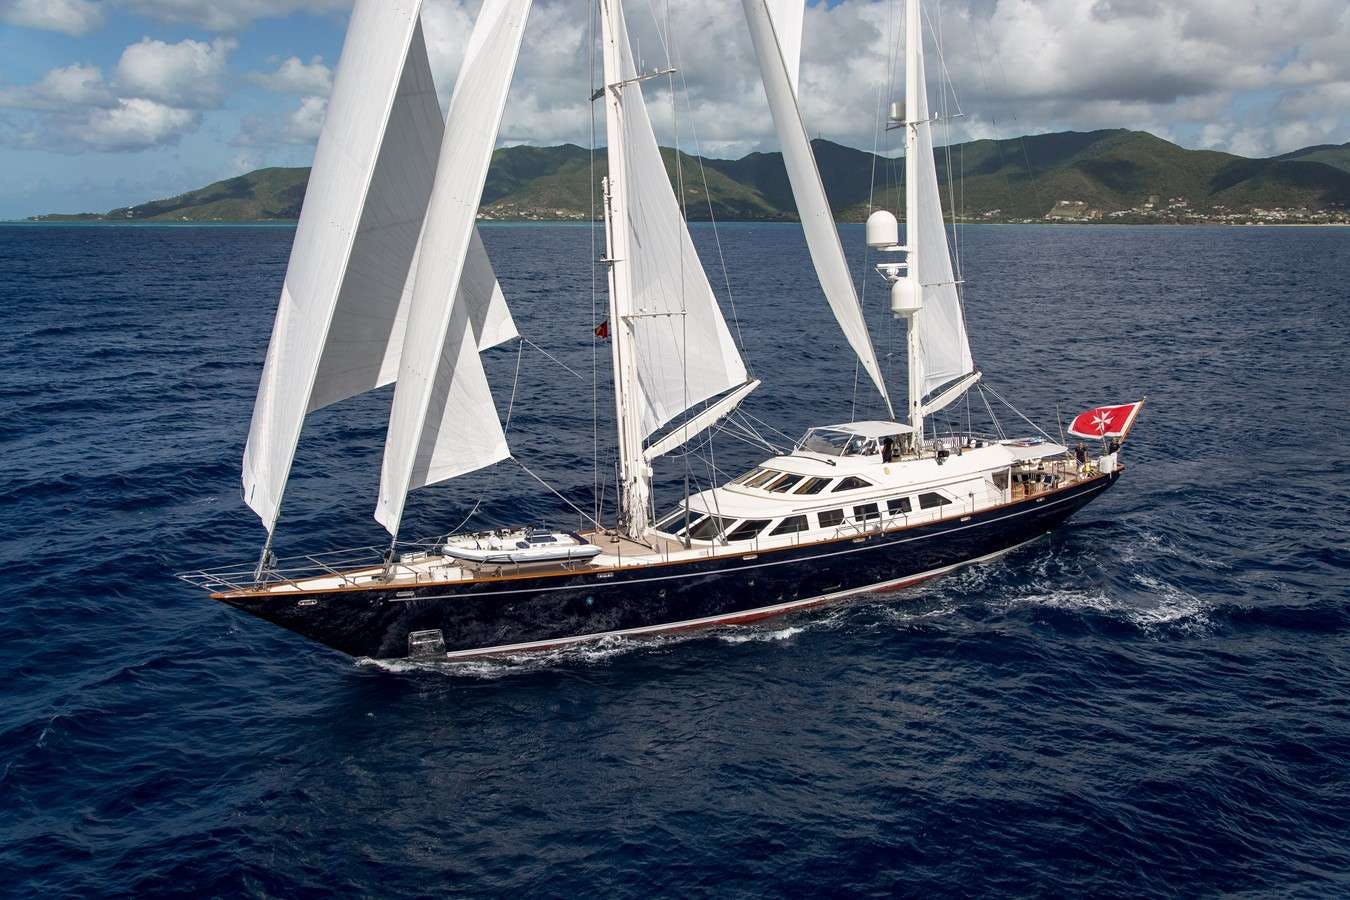 ELLEN - Yacht Charter Spain & Boat hire in W. Med -Naples/Sicily, W. Med -Riviera/Cors/Sard., Caribbean Leewards, Caribbean Windwards, Turkey, W. Med - Spain/Balearics, Caribbean Leewards, Caribbean Windwards 1